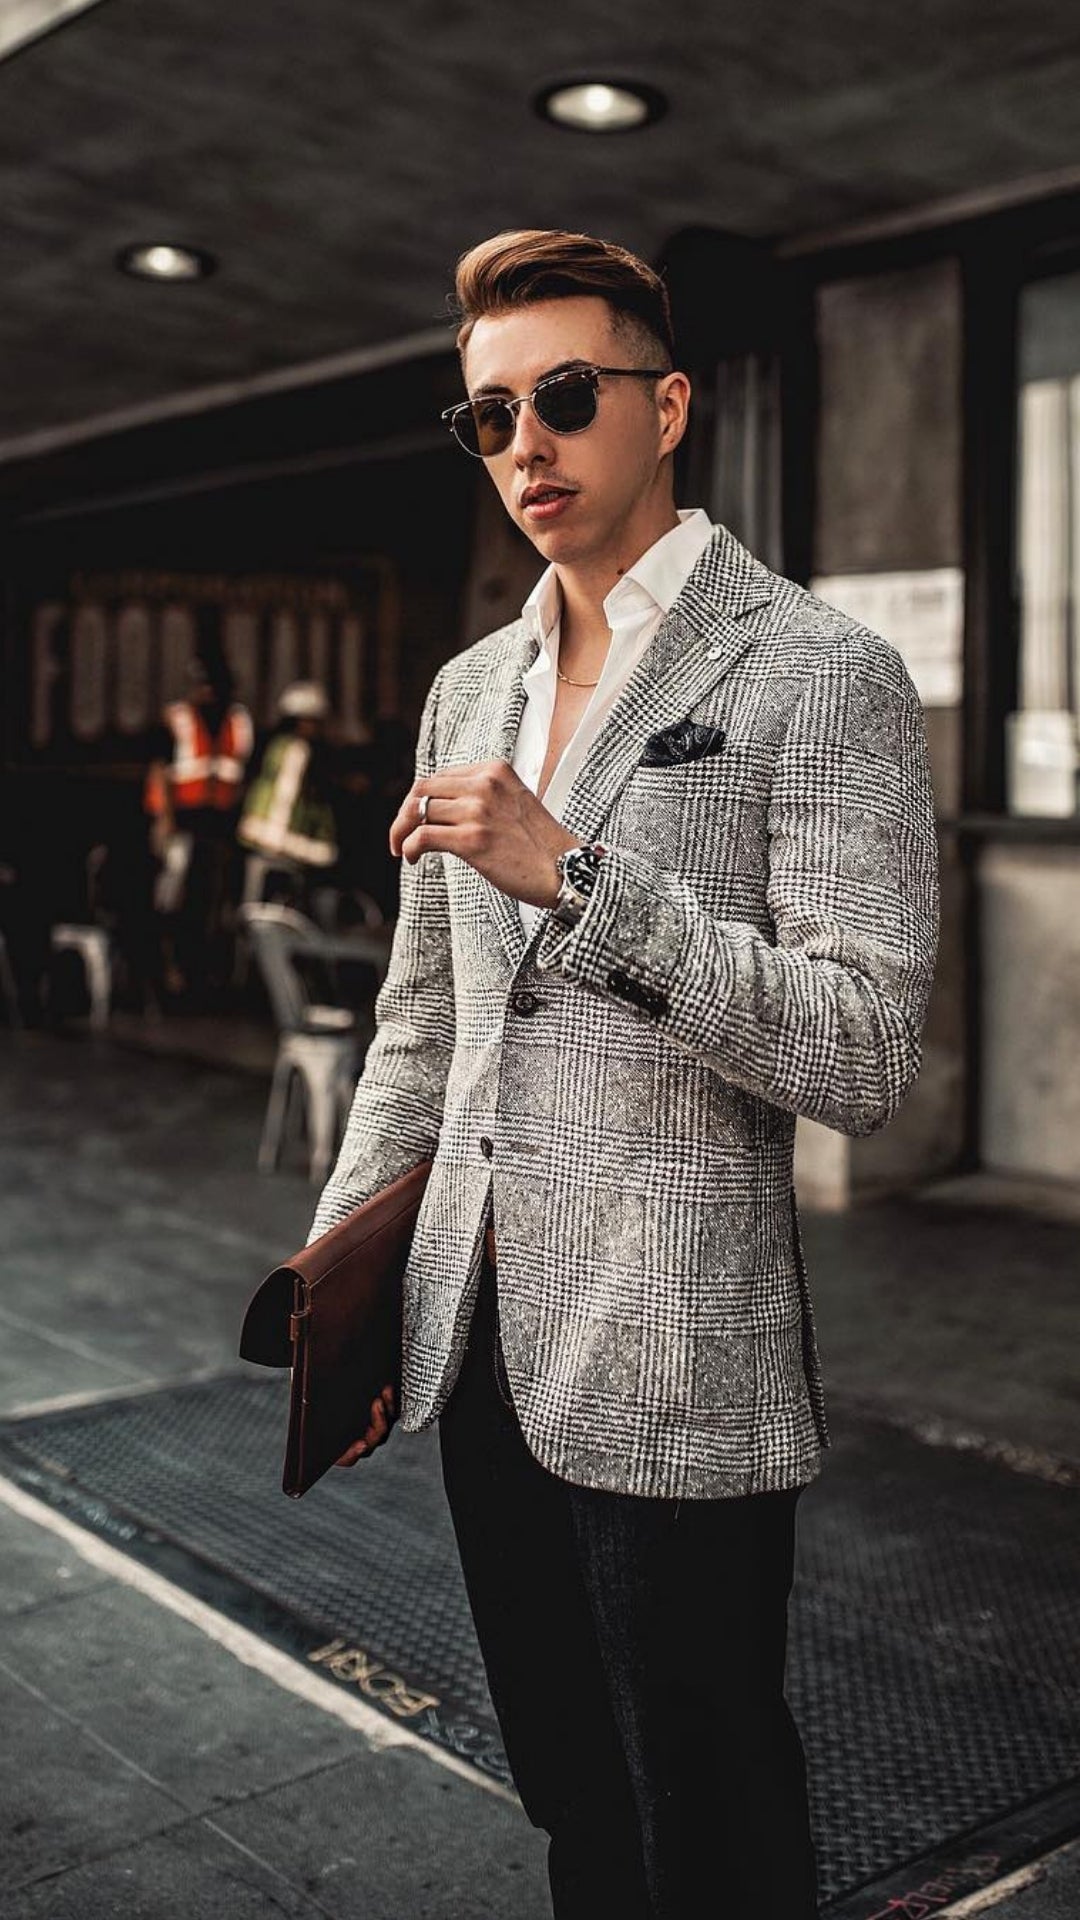 This Is Where I Go For Truly Edgy Work Outfit Ideas #workwear #businesscasual #outfits #mensfashion #streetstyle